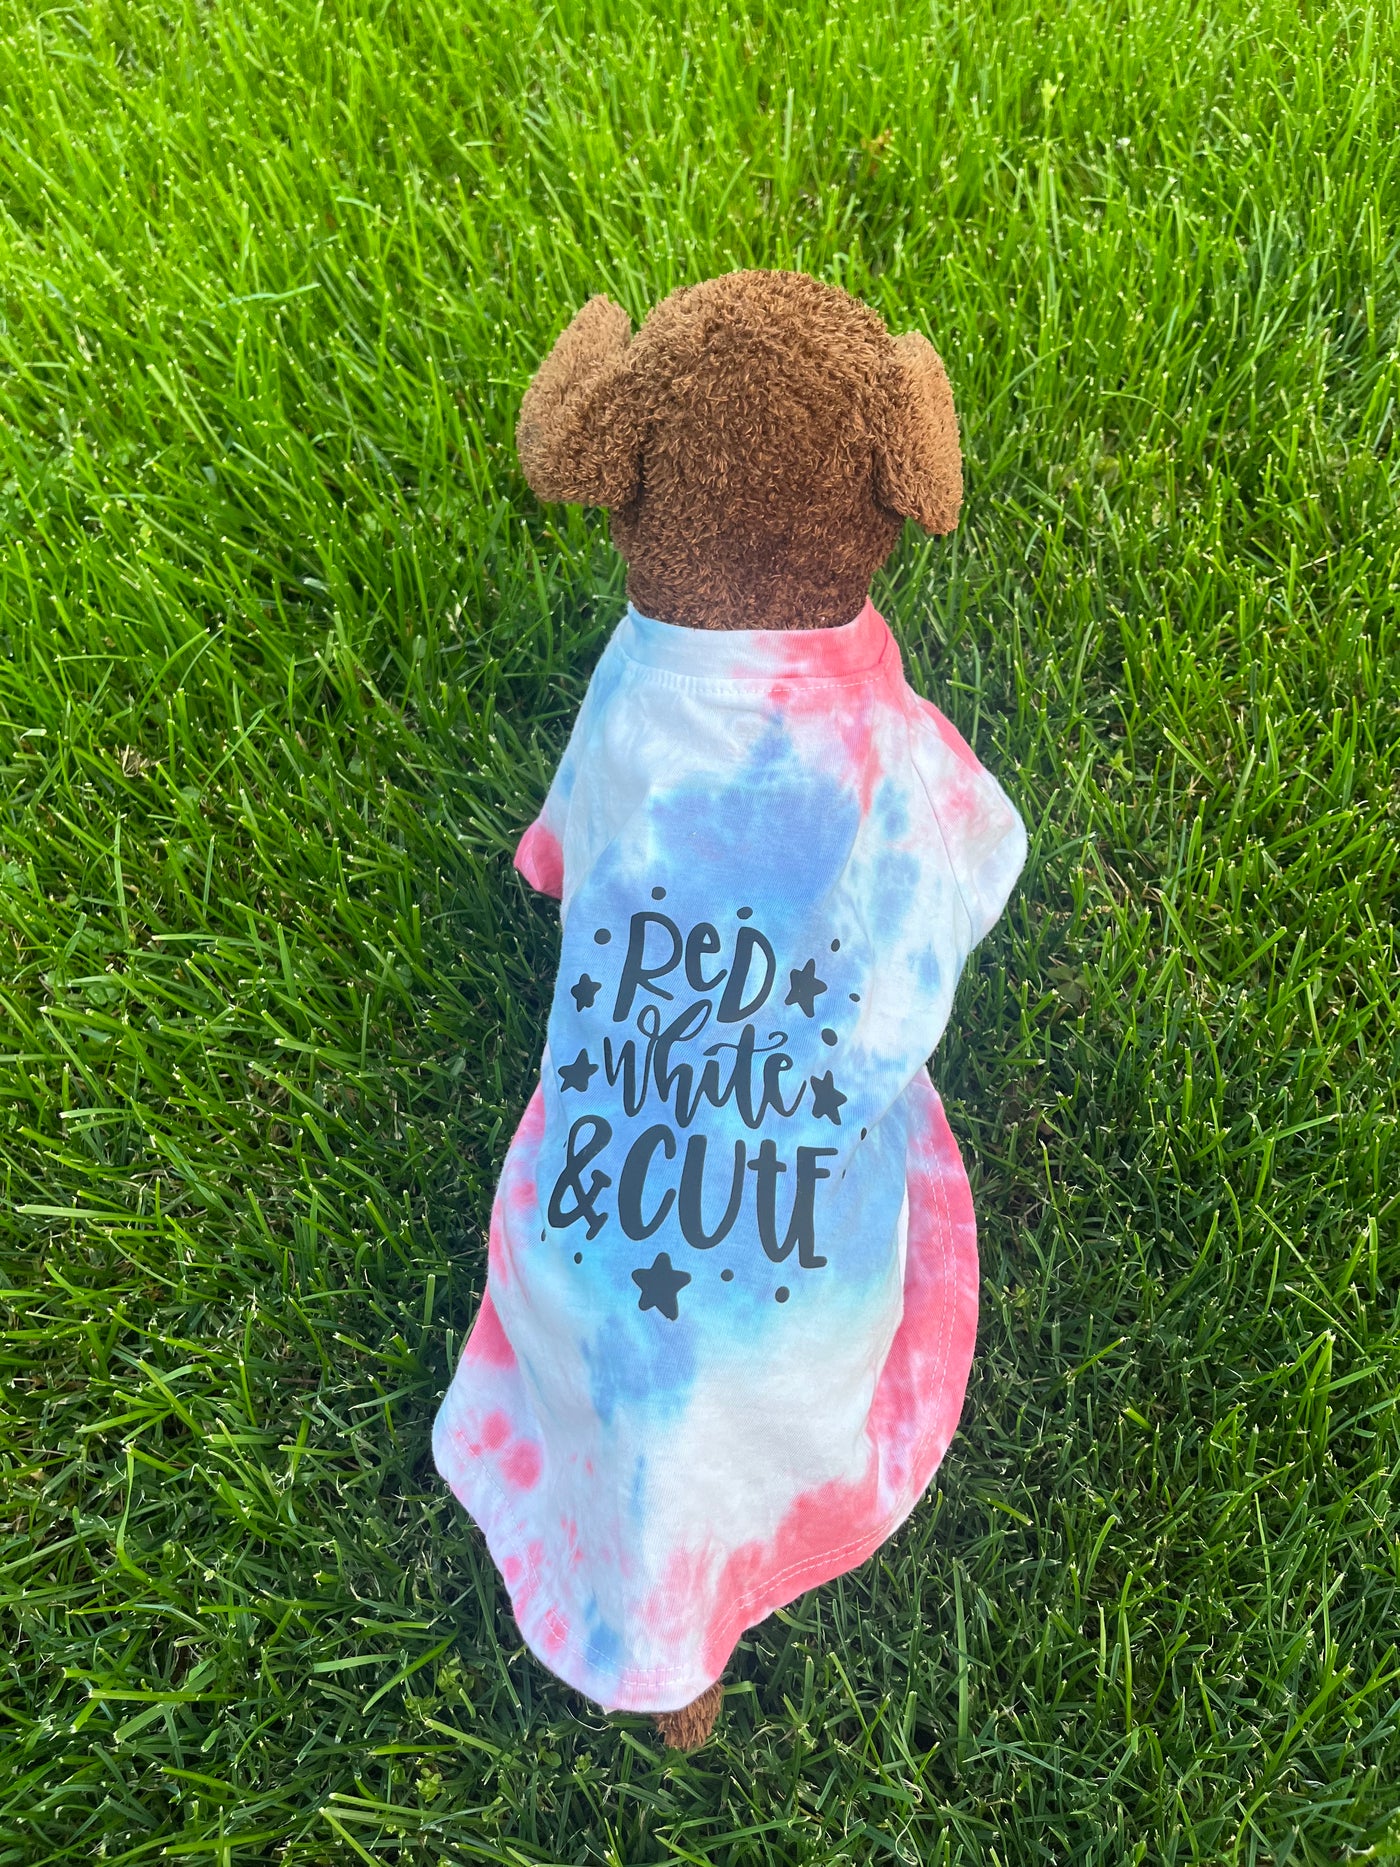 Tie-Dye Shirt for Pets - Red, White & Cute